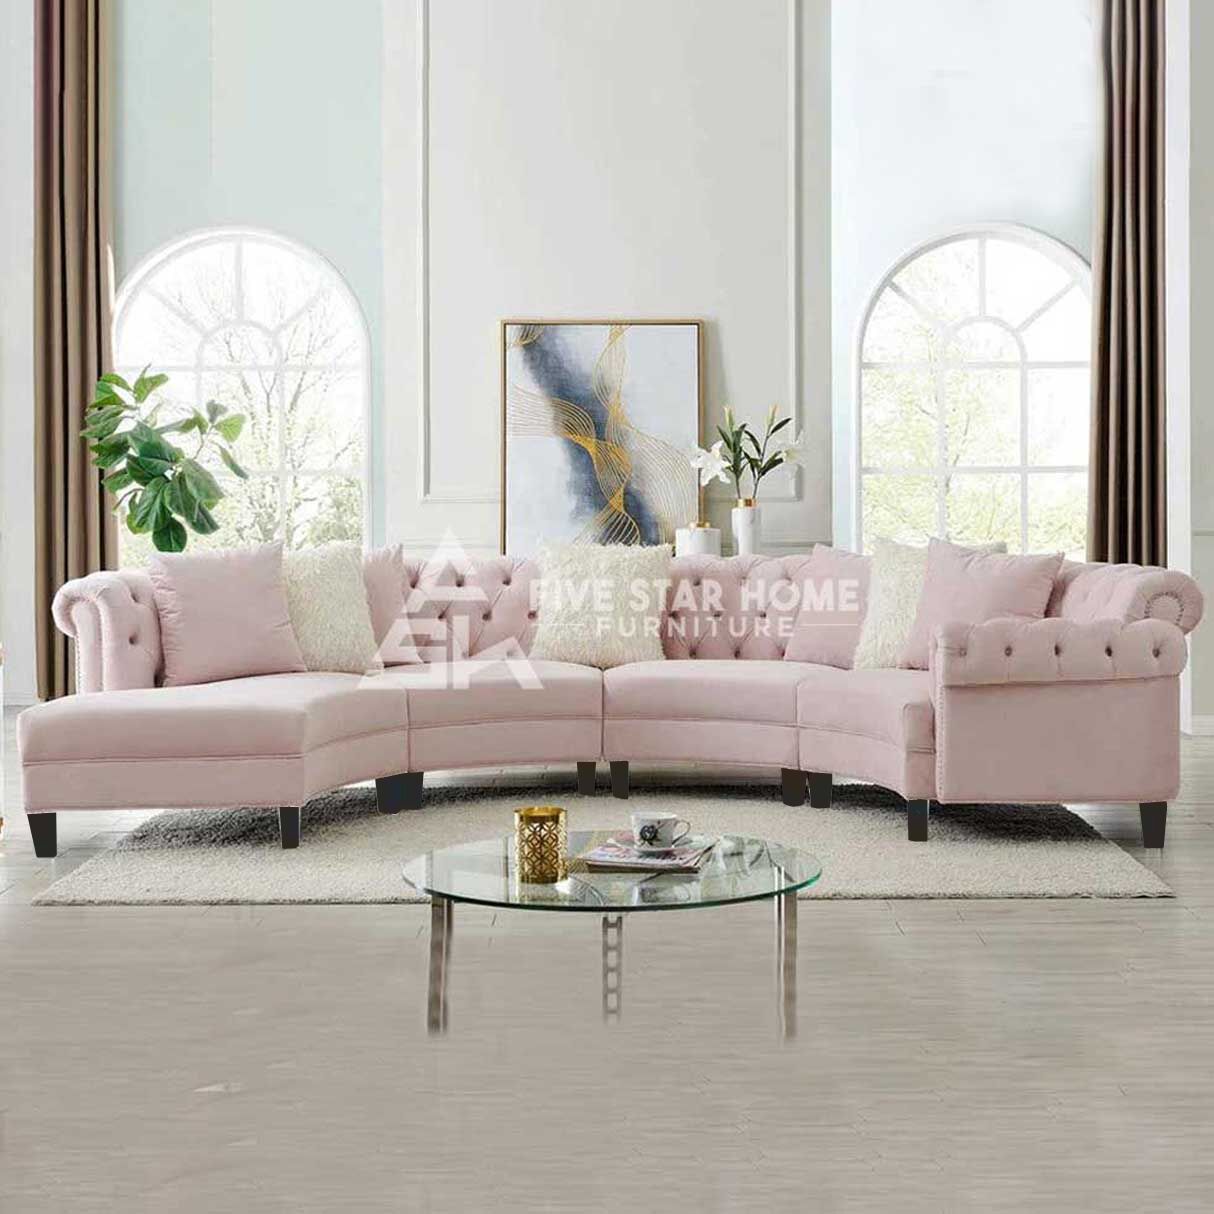 4-Piece Curved Sectional Sofa